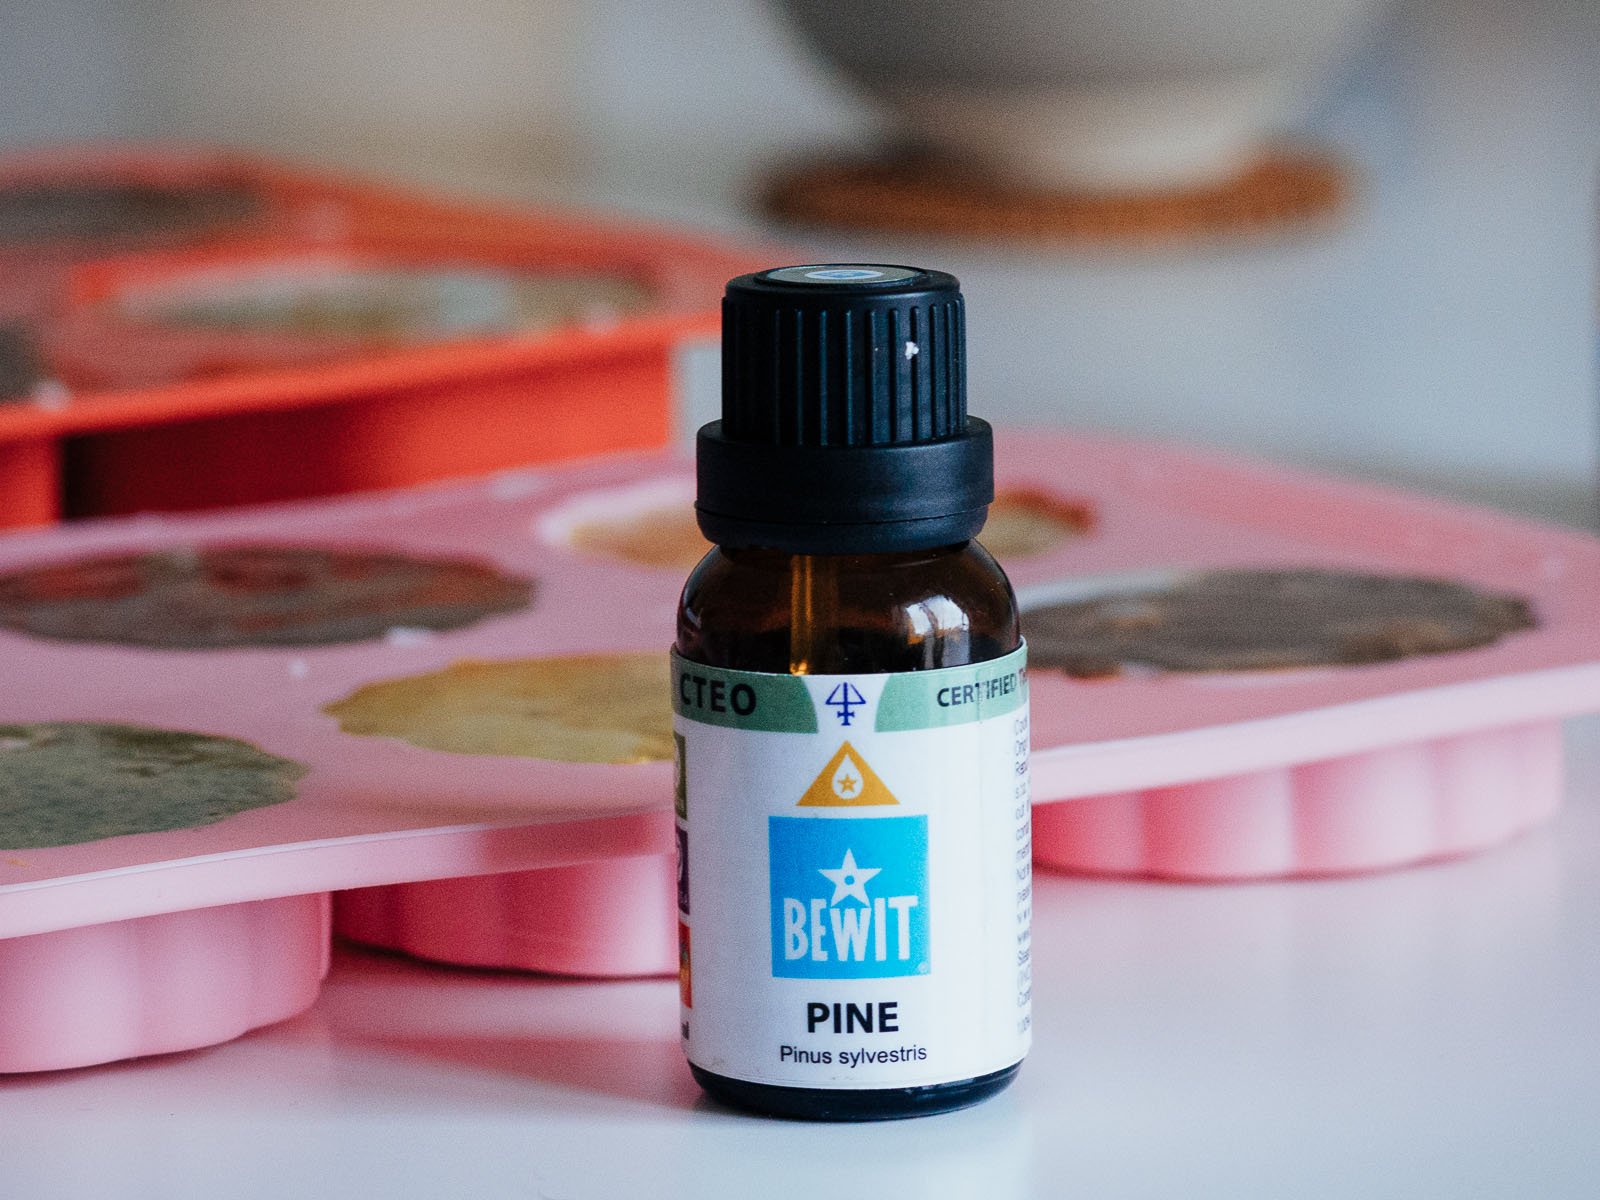 BEWIT Pine - This is a 100% pure essential oil - 5